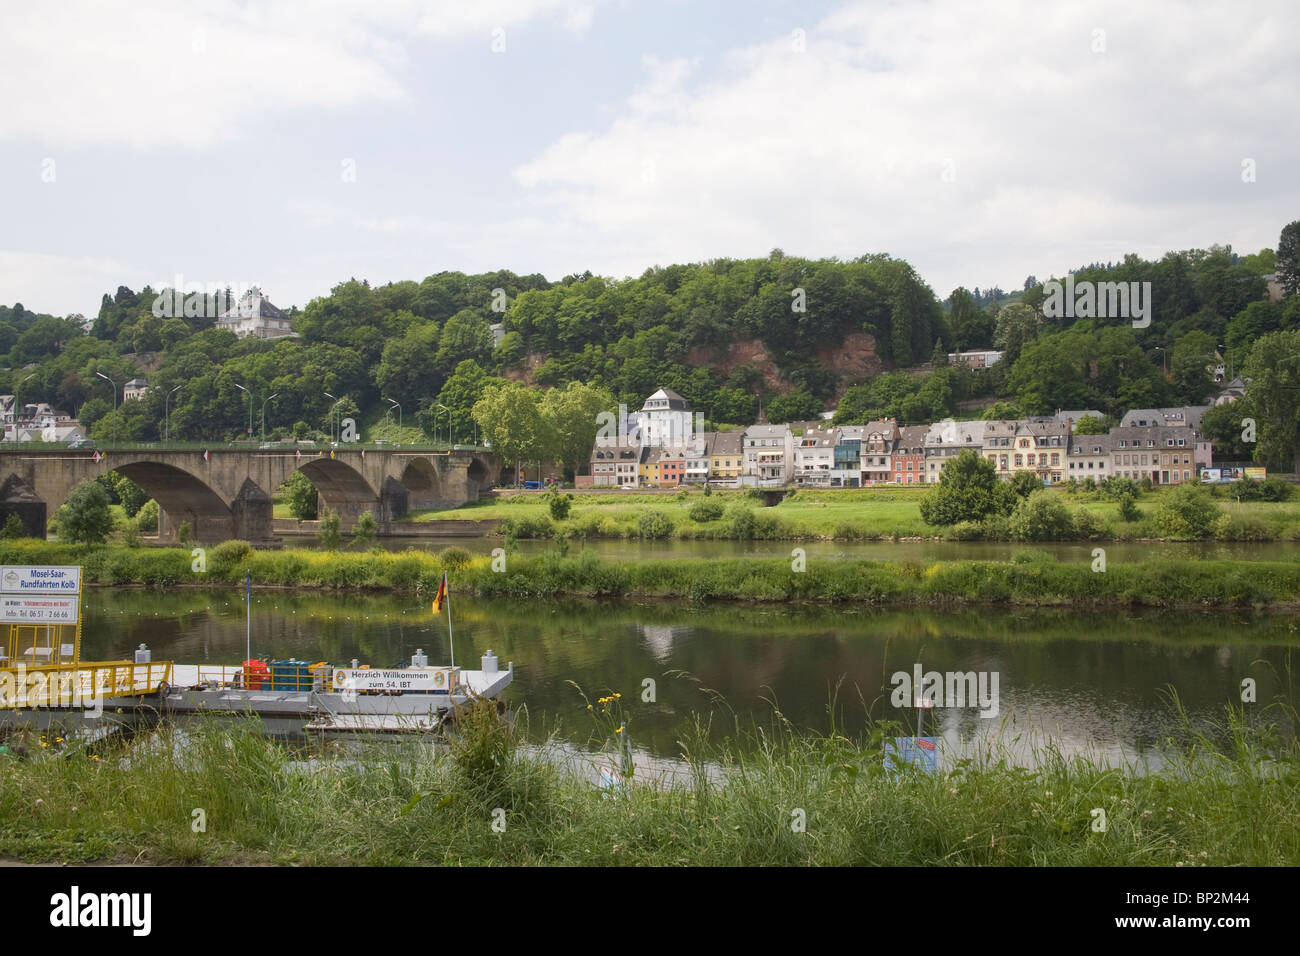 Trier Germany Europe EU Looking across the River Mosel to buildings on the opposite bank Stock Photo